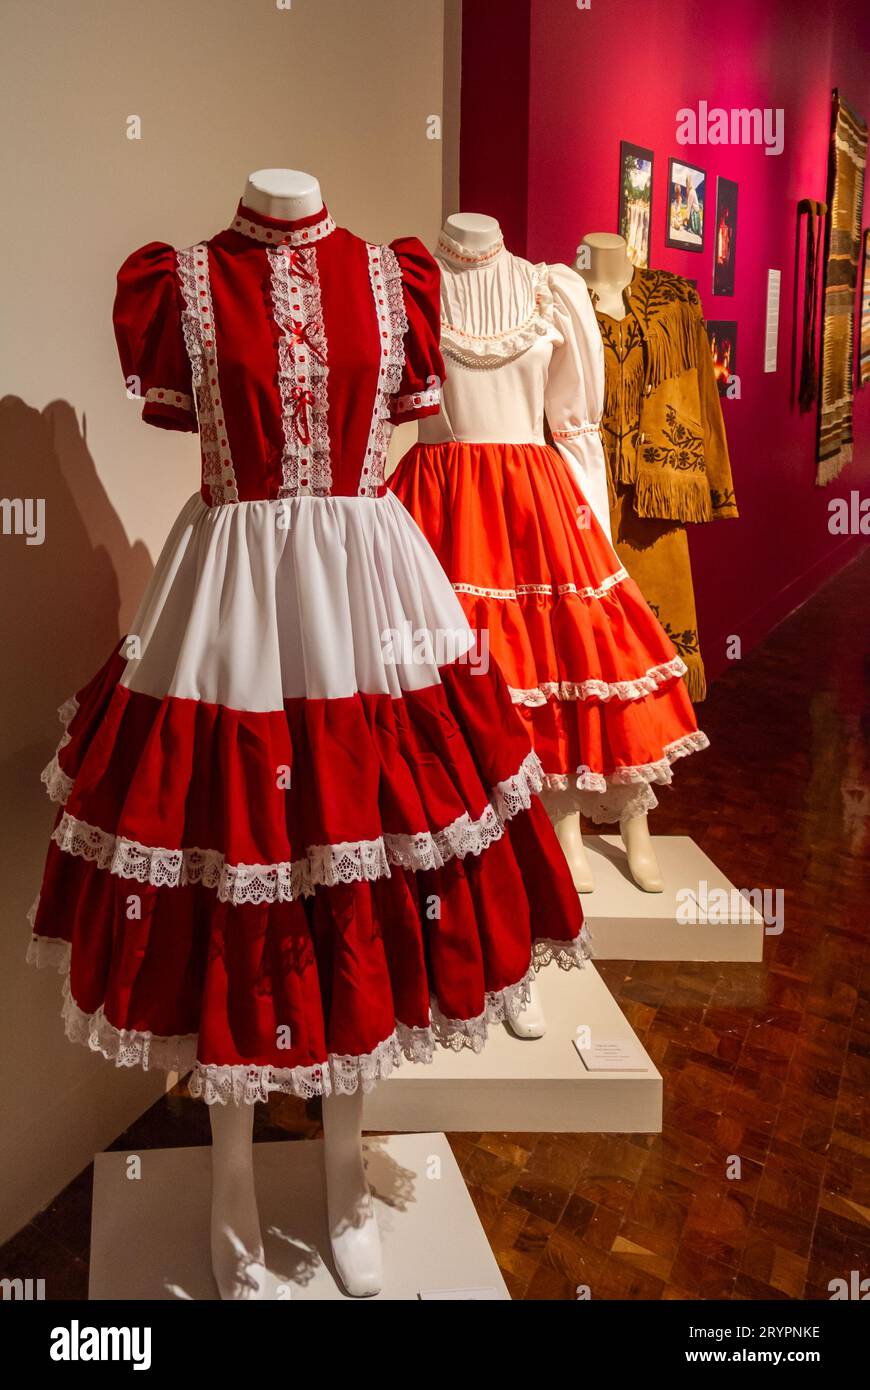 Mexico City, CDMX, Mexico, Traditional costumes of  Indigenous people at Museo de Arte Popular (in English, Museum of Popular art). Editorial only. Stock Photo